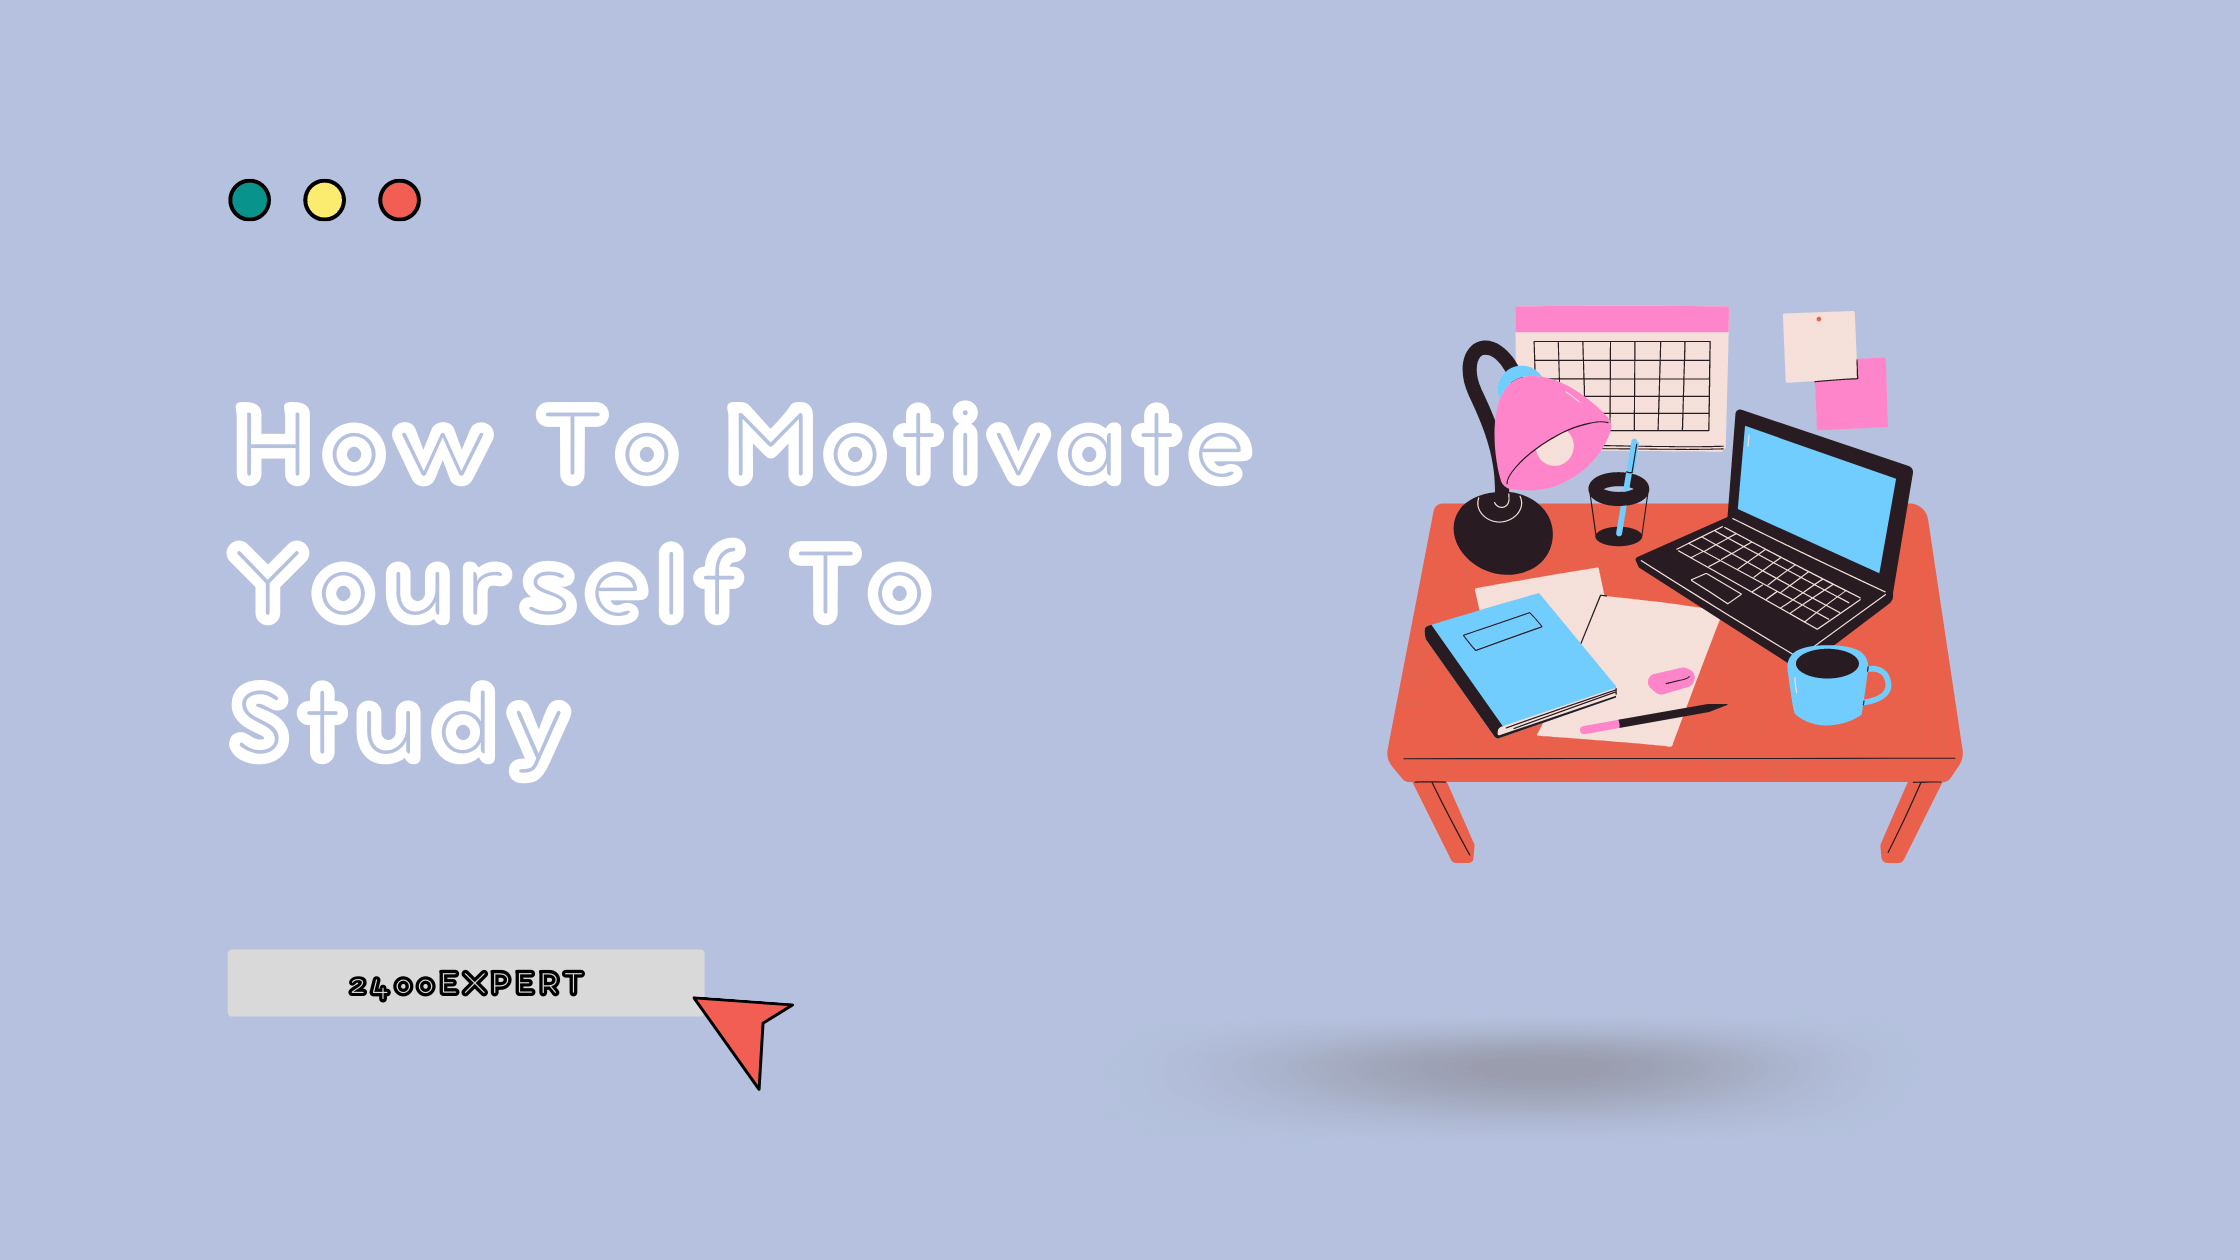 How To Motivate Yourself To Study - 2400Expert